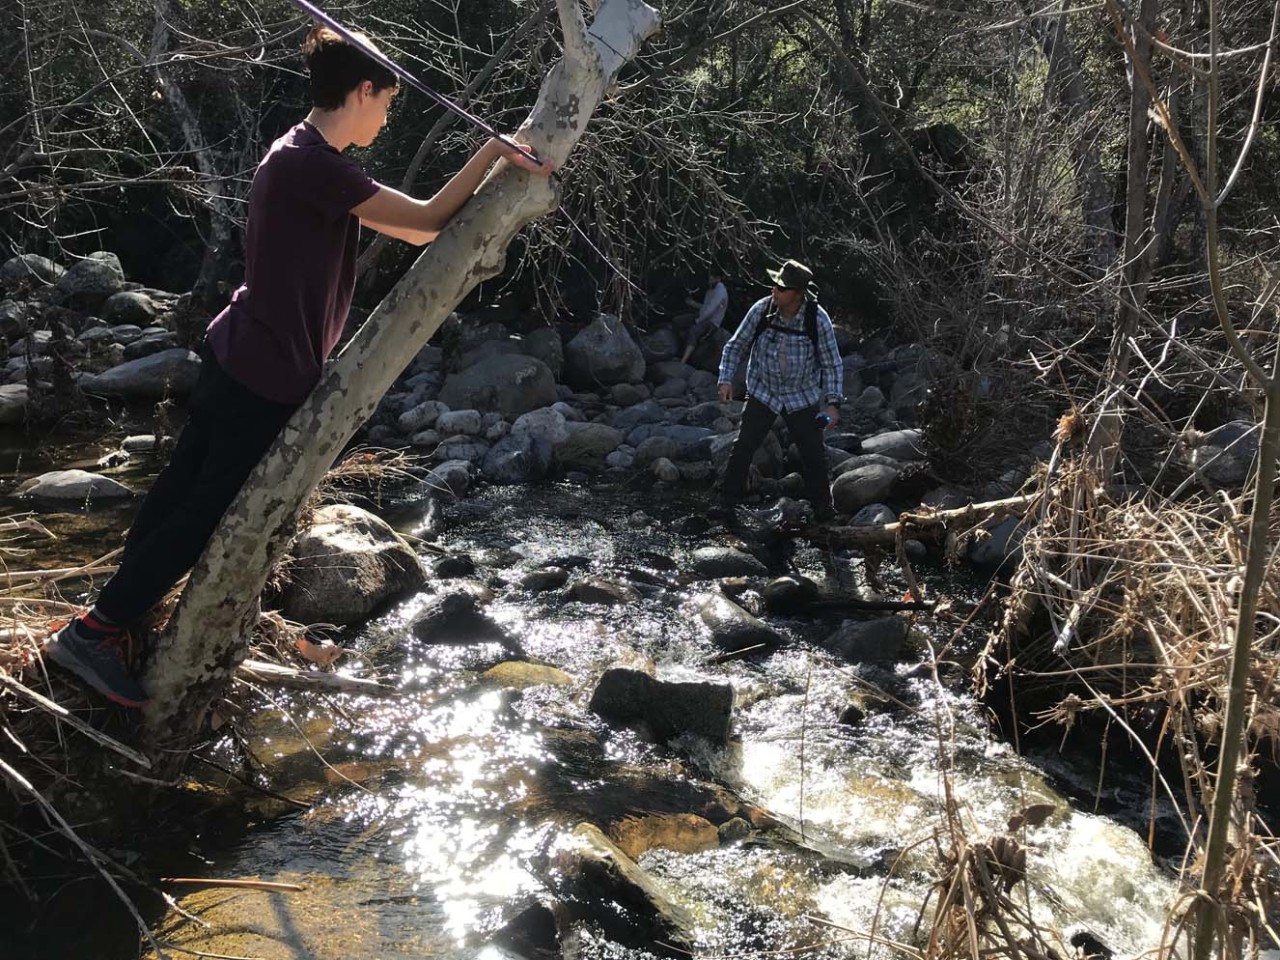 In January, 41 Scouts and Scouters from Troop 318B/G hiked 5 miles to Fisherman’s Camp and Tenaja Falls in the San Mateo Canyon Wilderness!